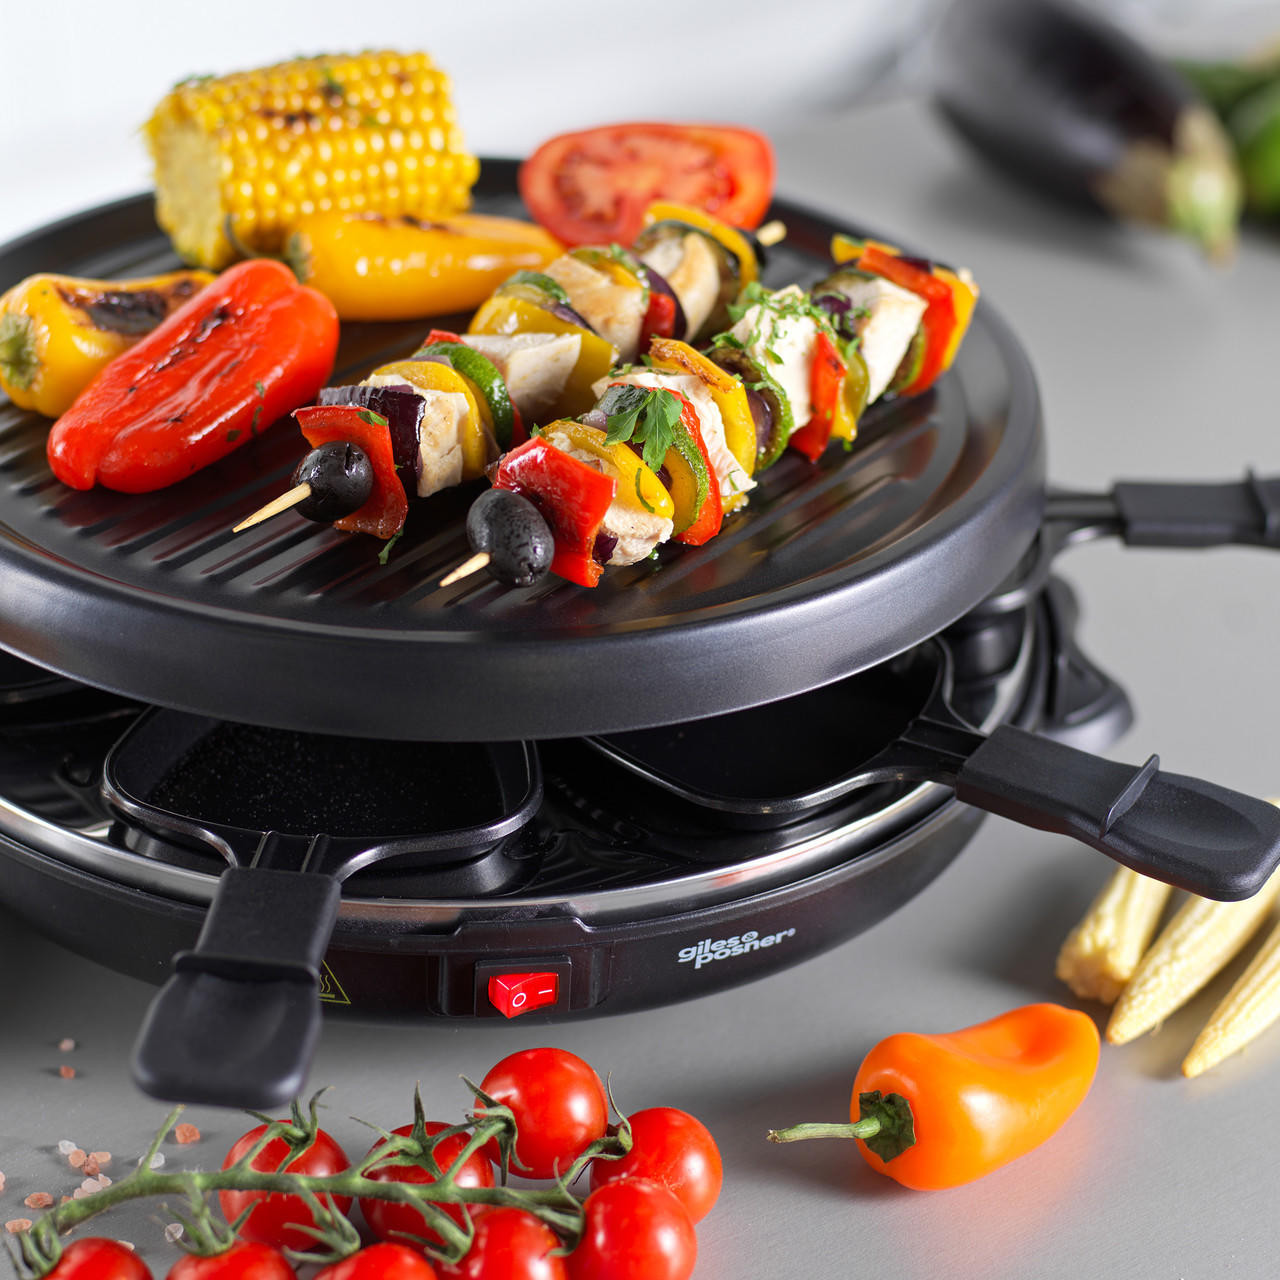 https://cdn11.bigcommerce.com/s-x0ht6cfst9/images/stencil/1280x1280/products/5449/387456/giles-and-posner-electric-round-non-stick-raclette-grill-indoor-tabletop-6-person-raclette-non-stick-grill-pans-spatulas-included-approx-plate-size-29-cm-800-w-ek4511g-5054061417654__79879.1703781247.jpg?c=1